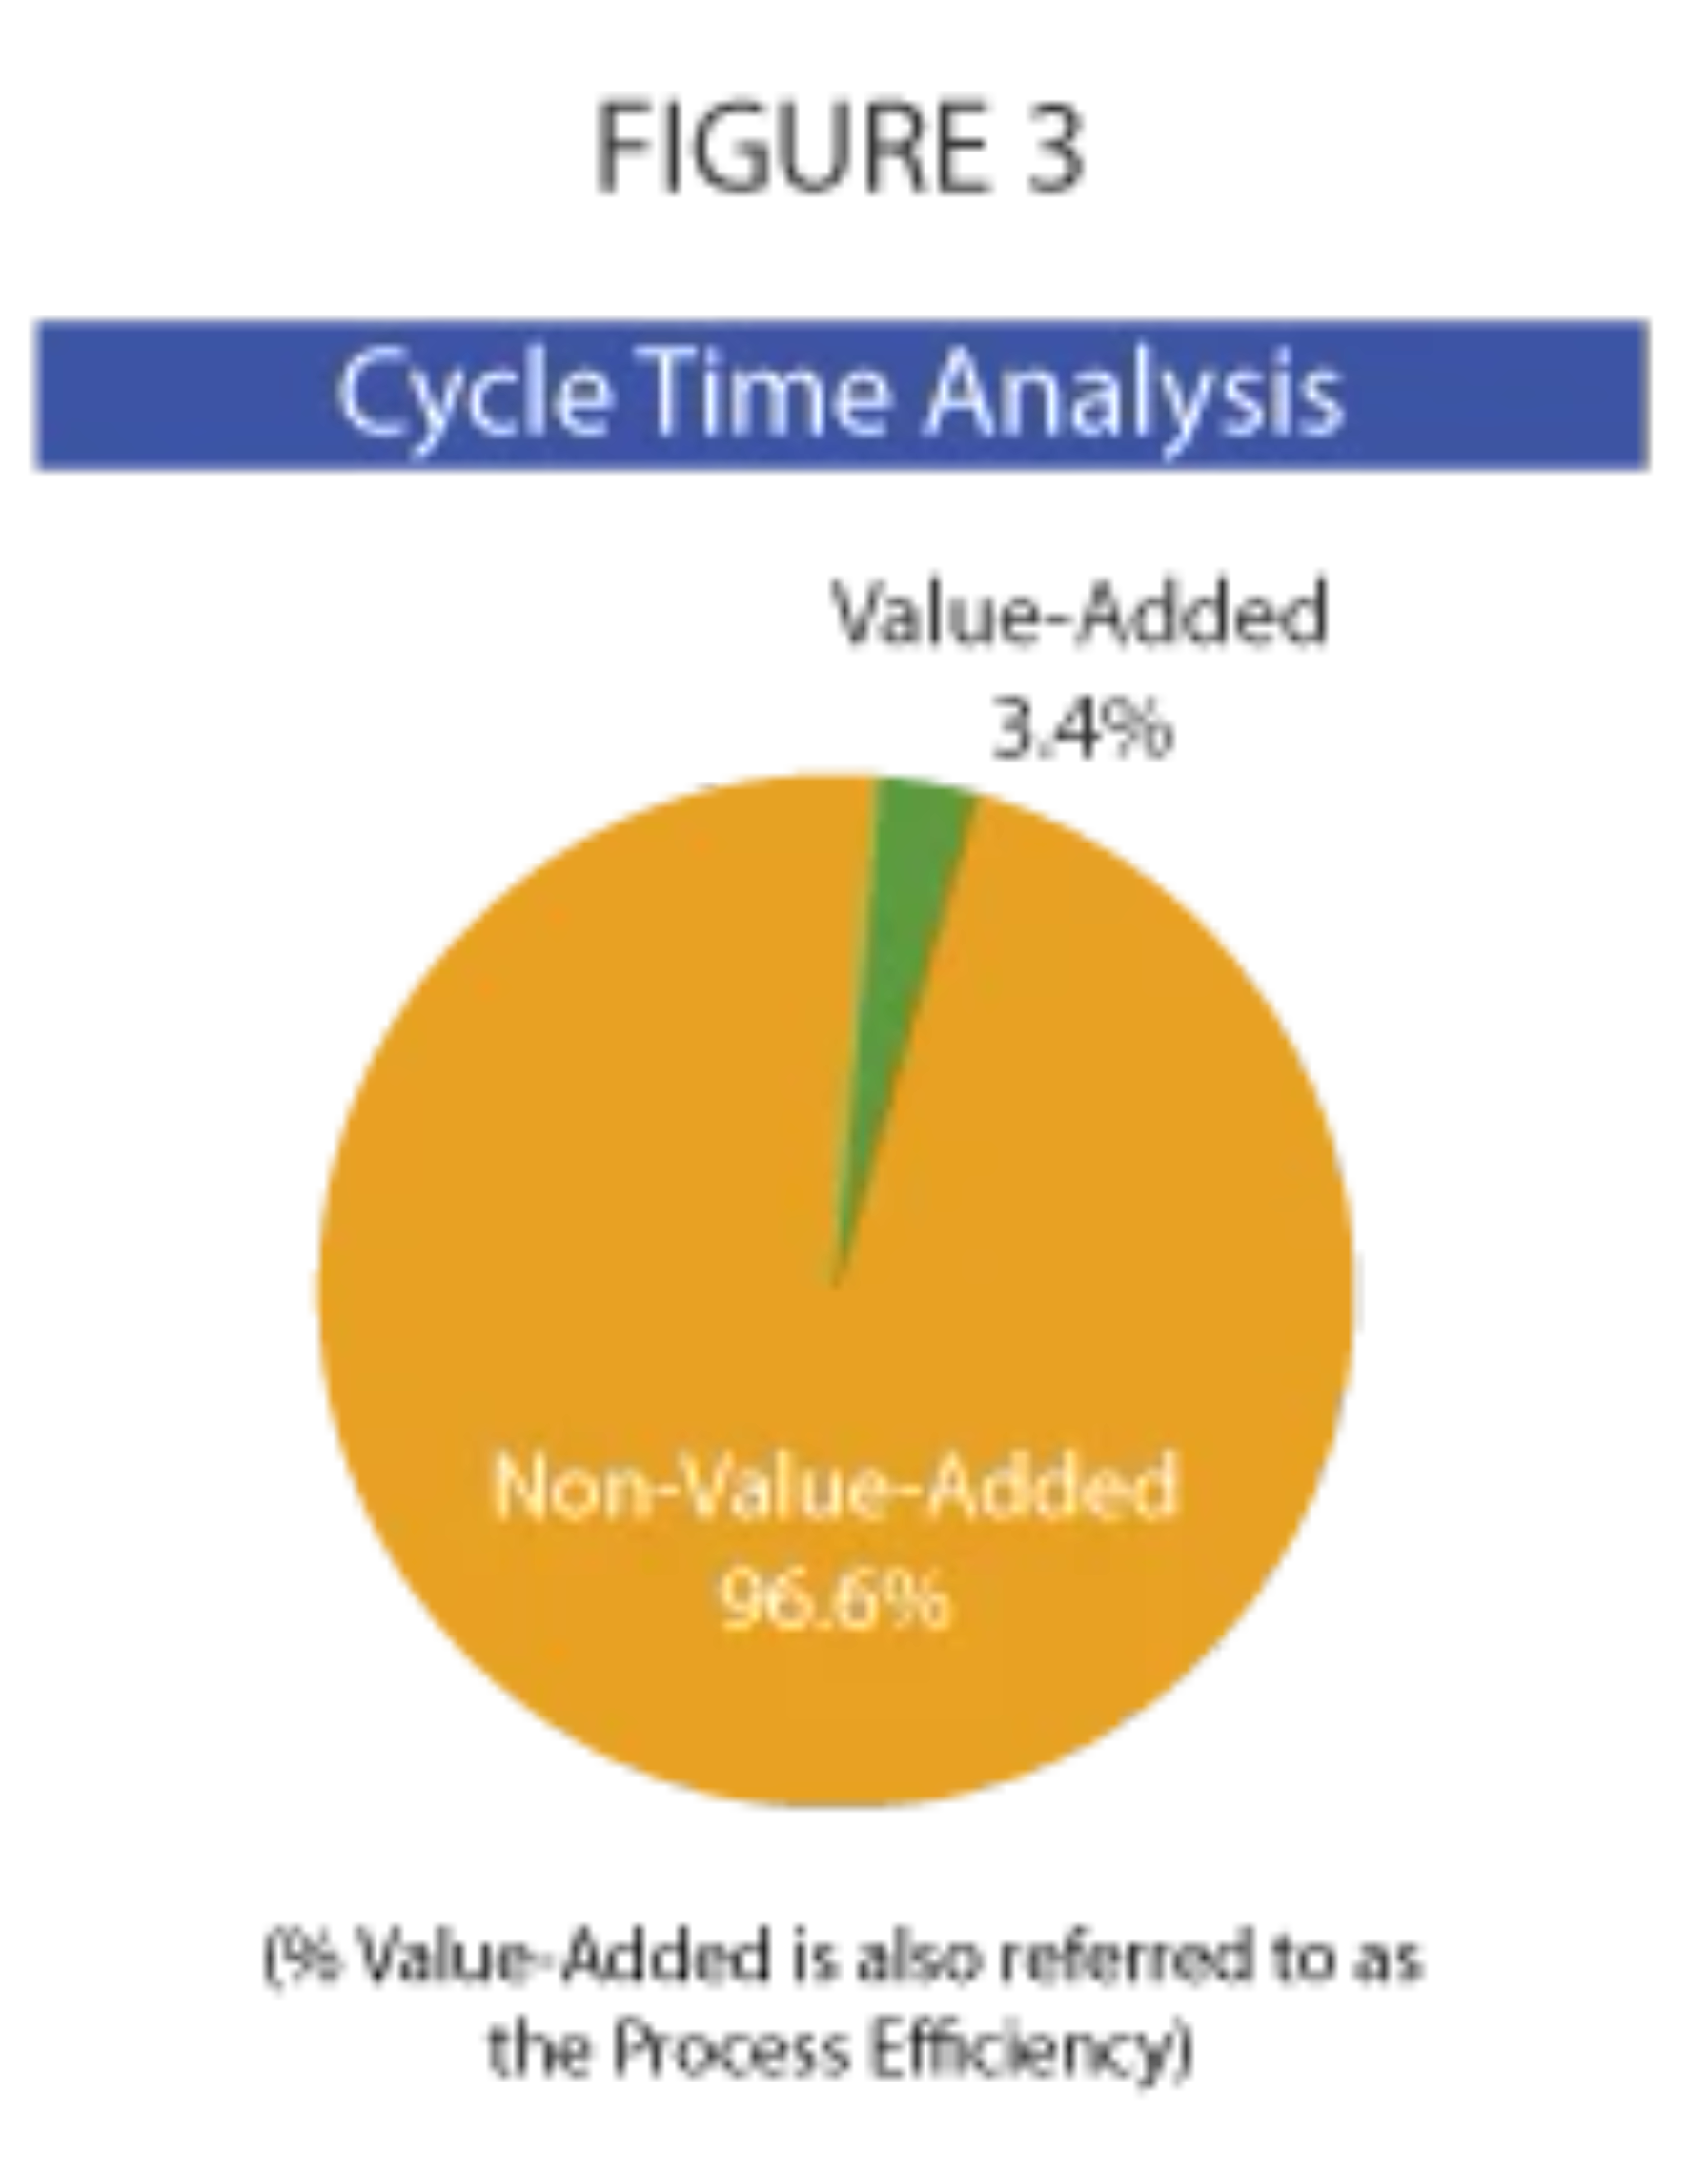 Example of a Pie Chart showing Cycle Time Analysis with components "Value-Added" and "Non-Value-Added"